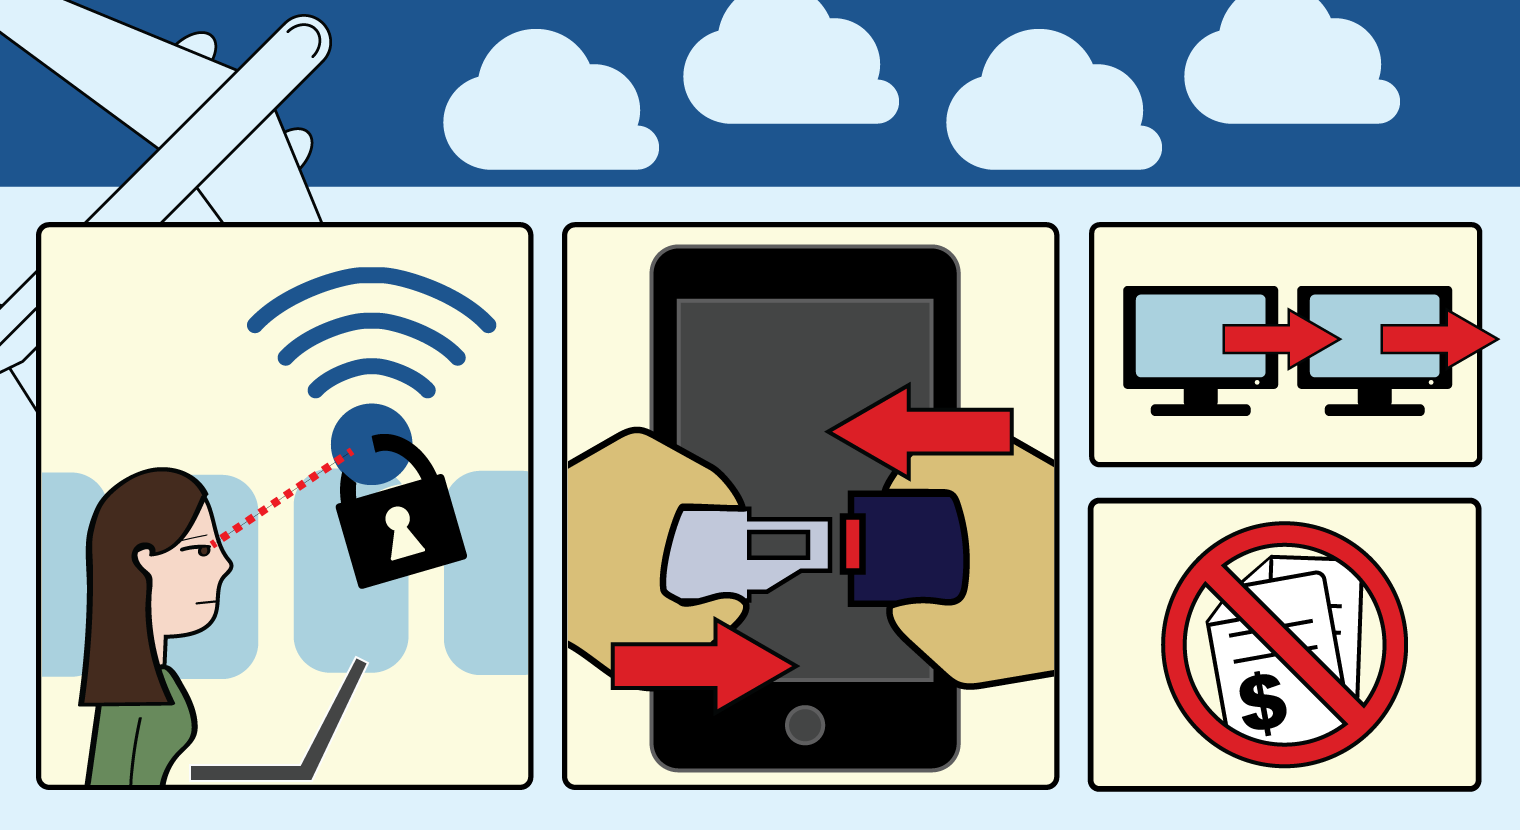 How to protect yourself when using airplane Wi-Fi